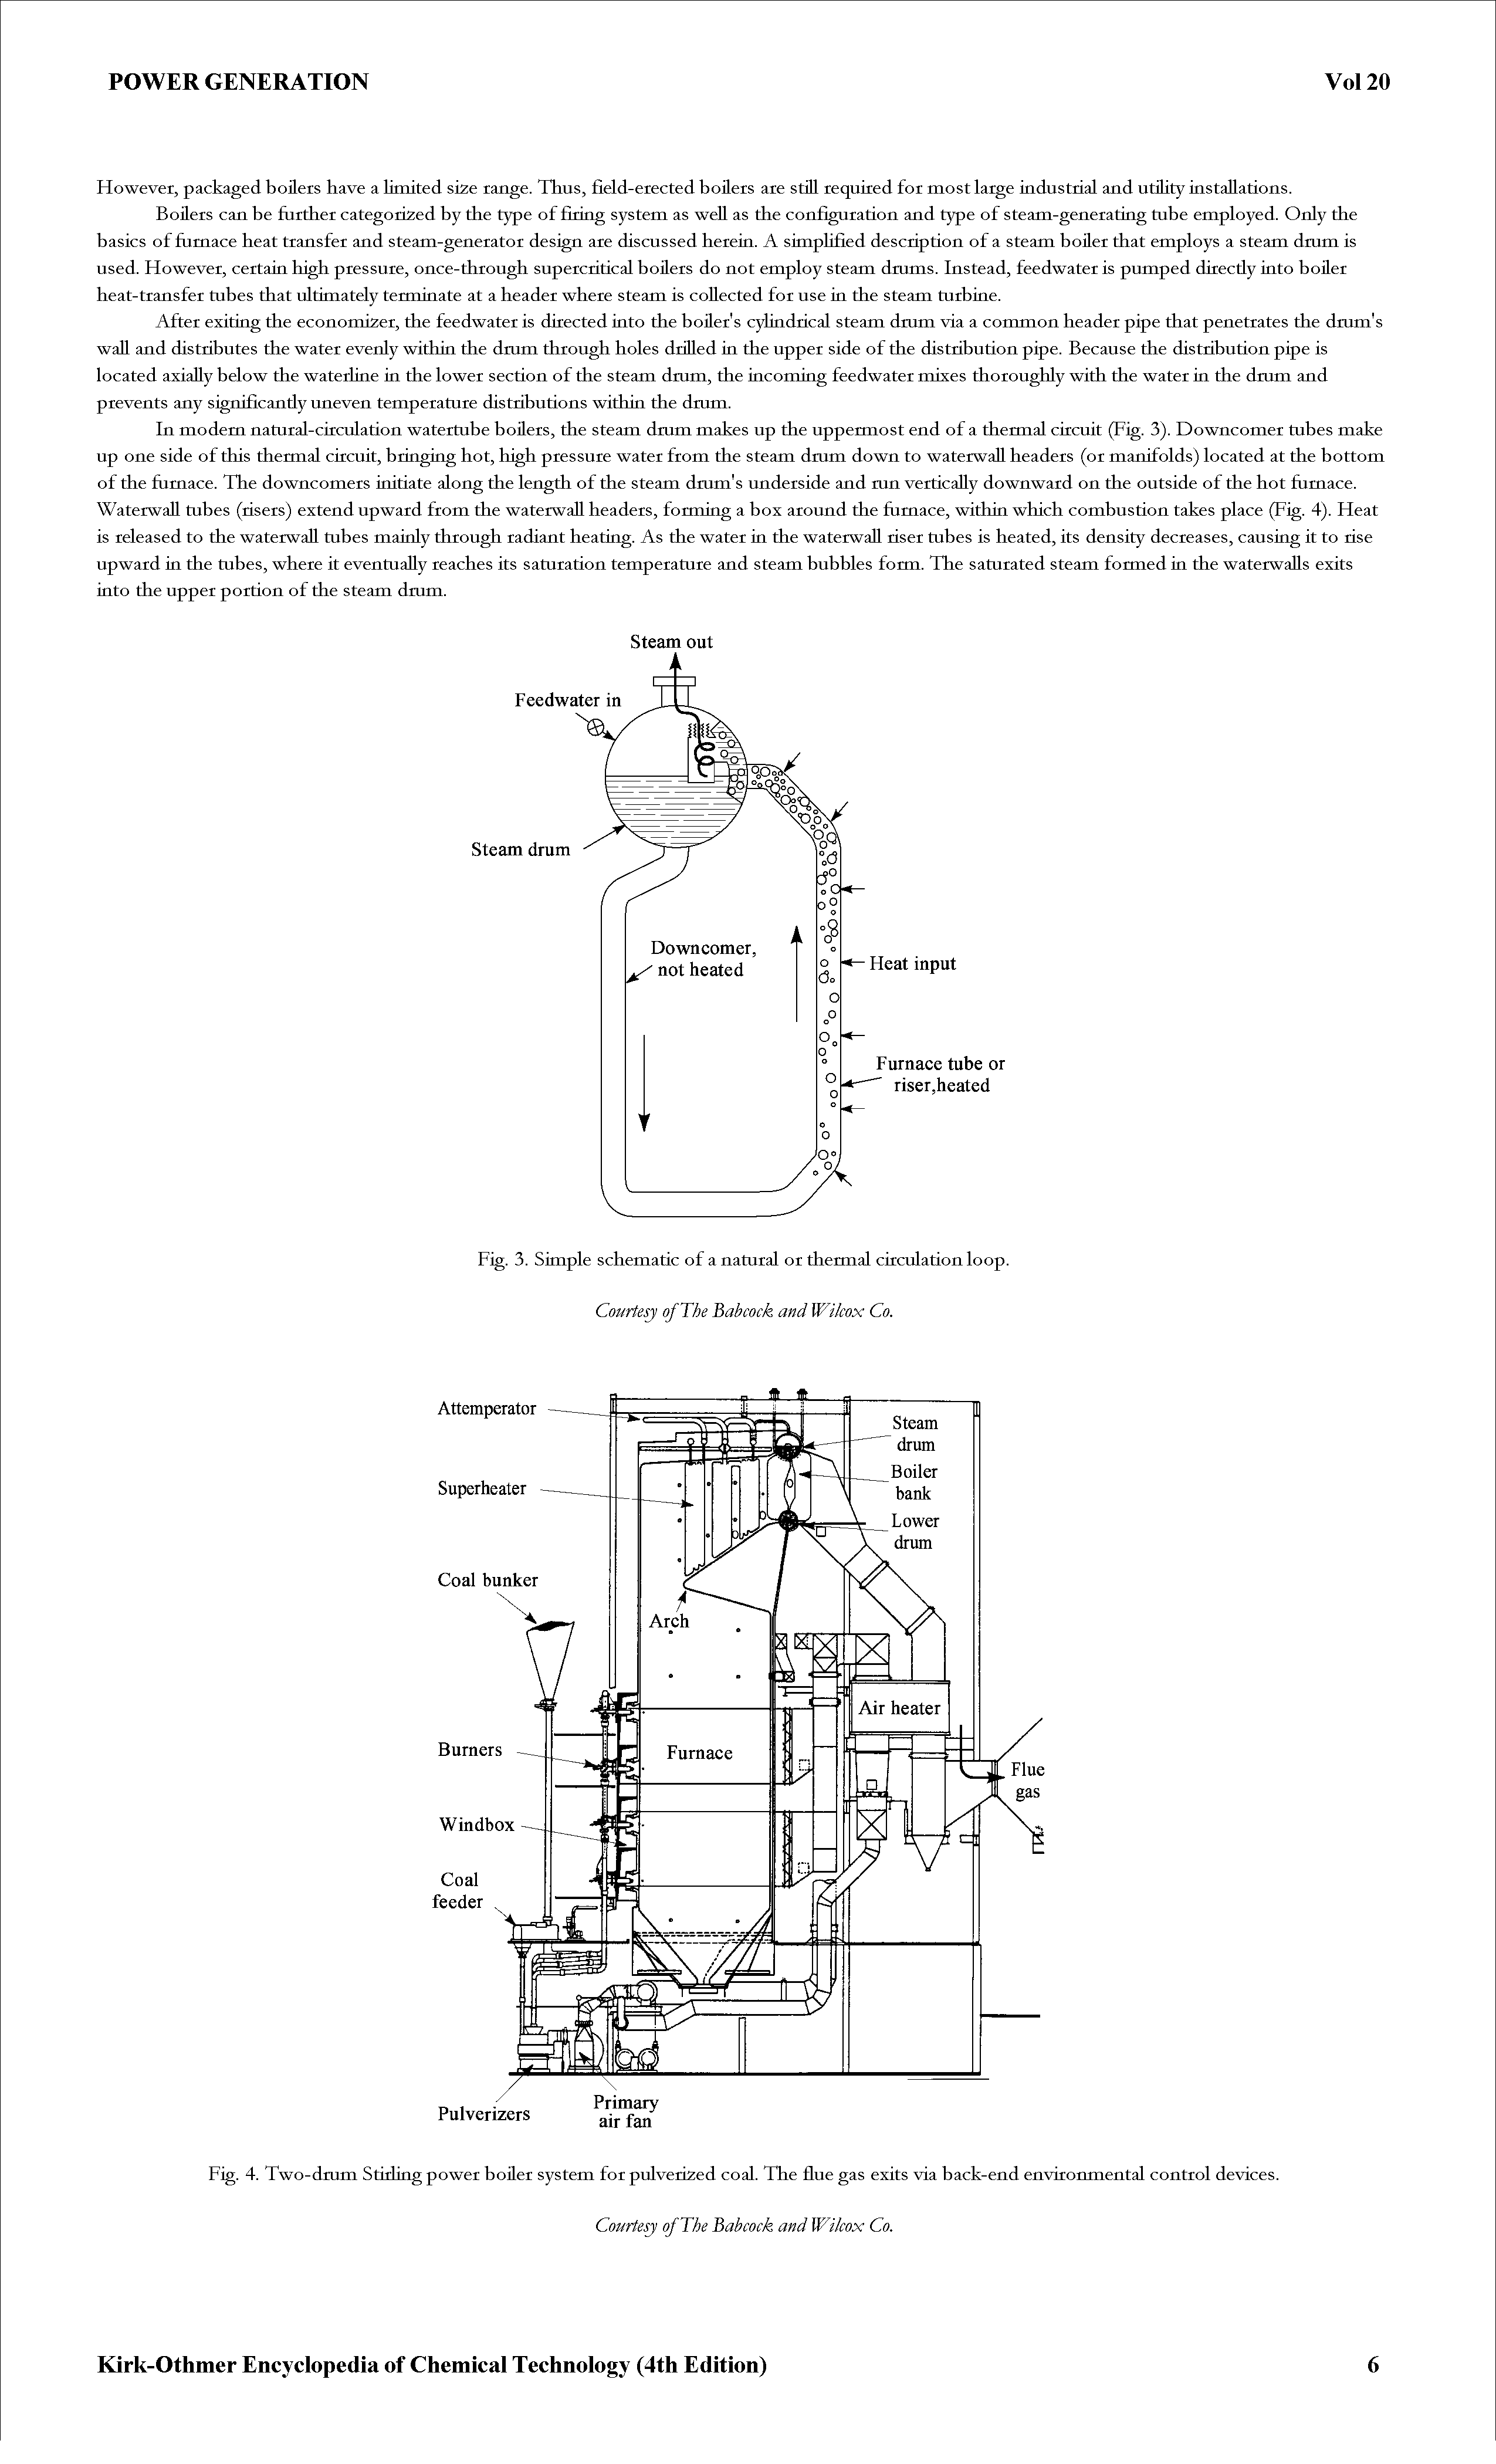 Fig. 4. Two-dmm Stirling power boiler system for pulverized coal. The flue gas exits via back-end environmental control devices.